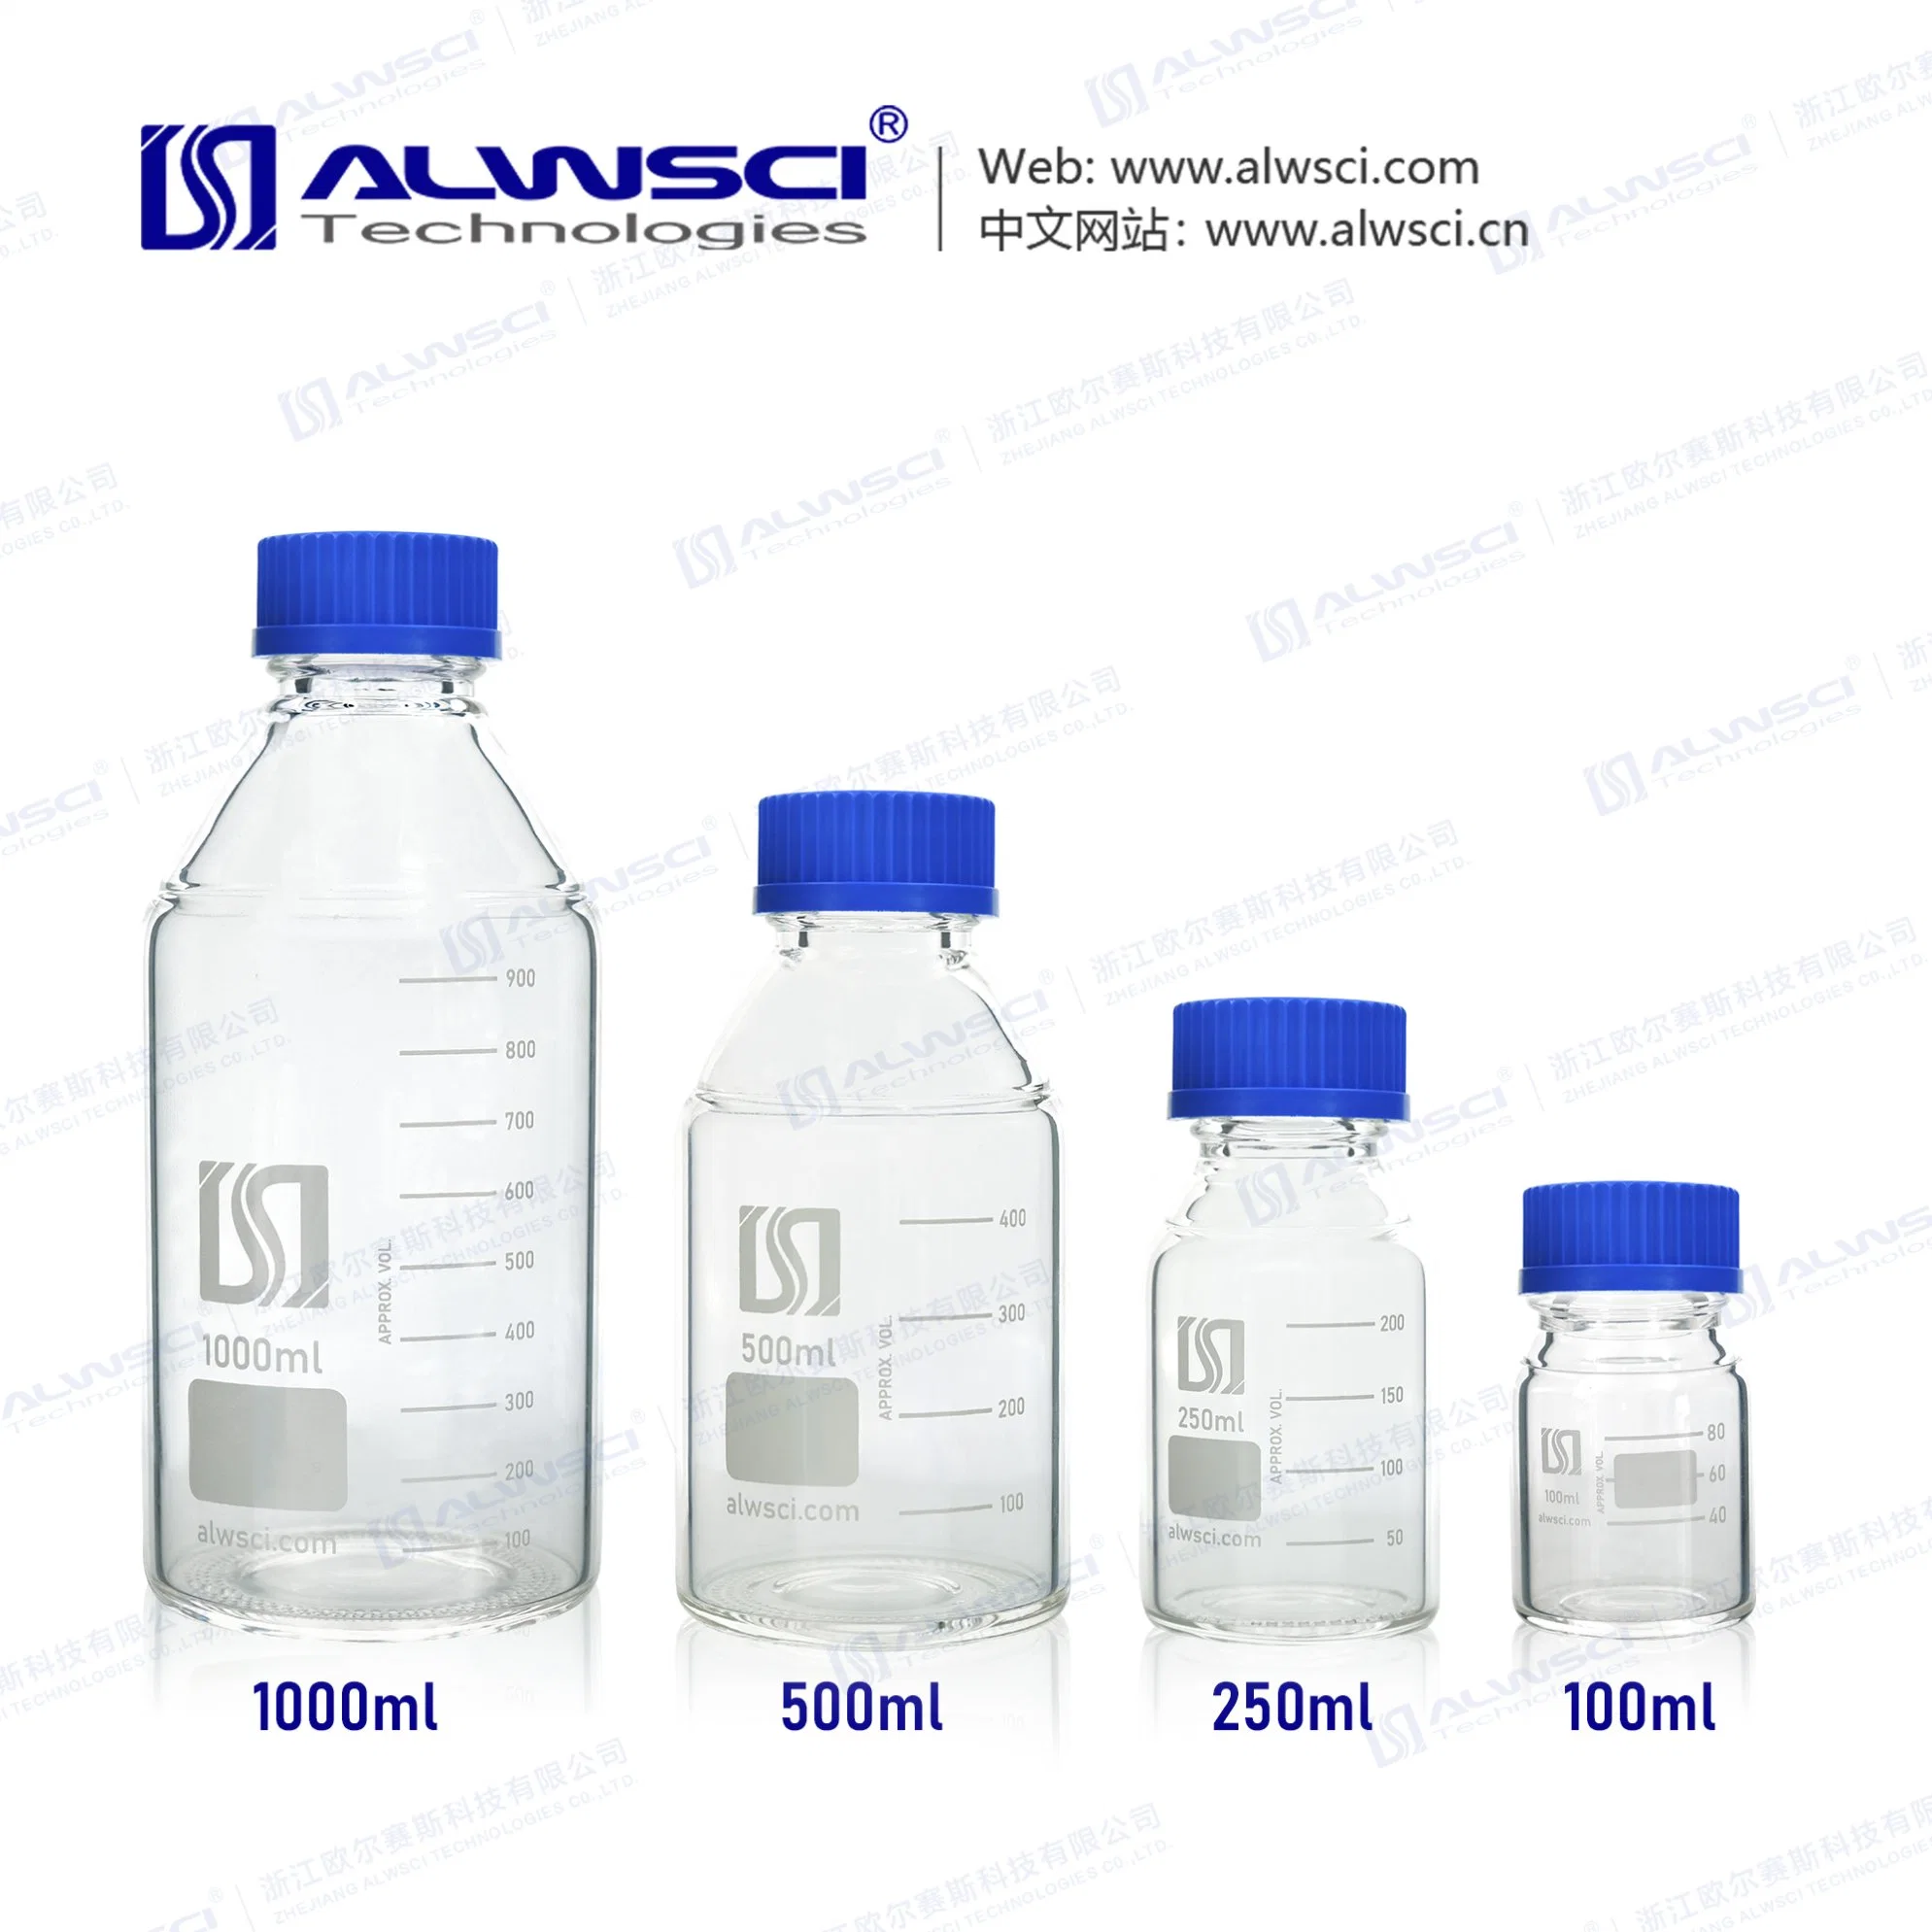 100ml Gl45 Clear Glass Reagent Bottle with Closed Screw Cap